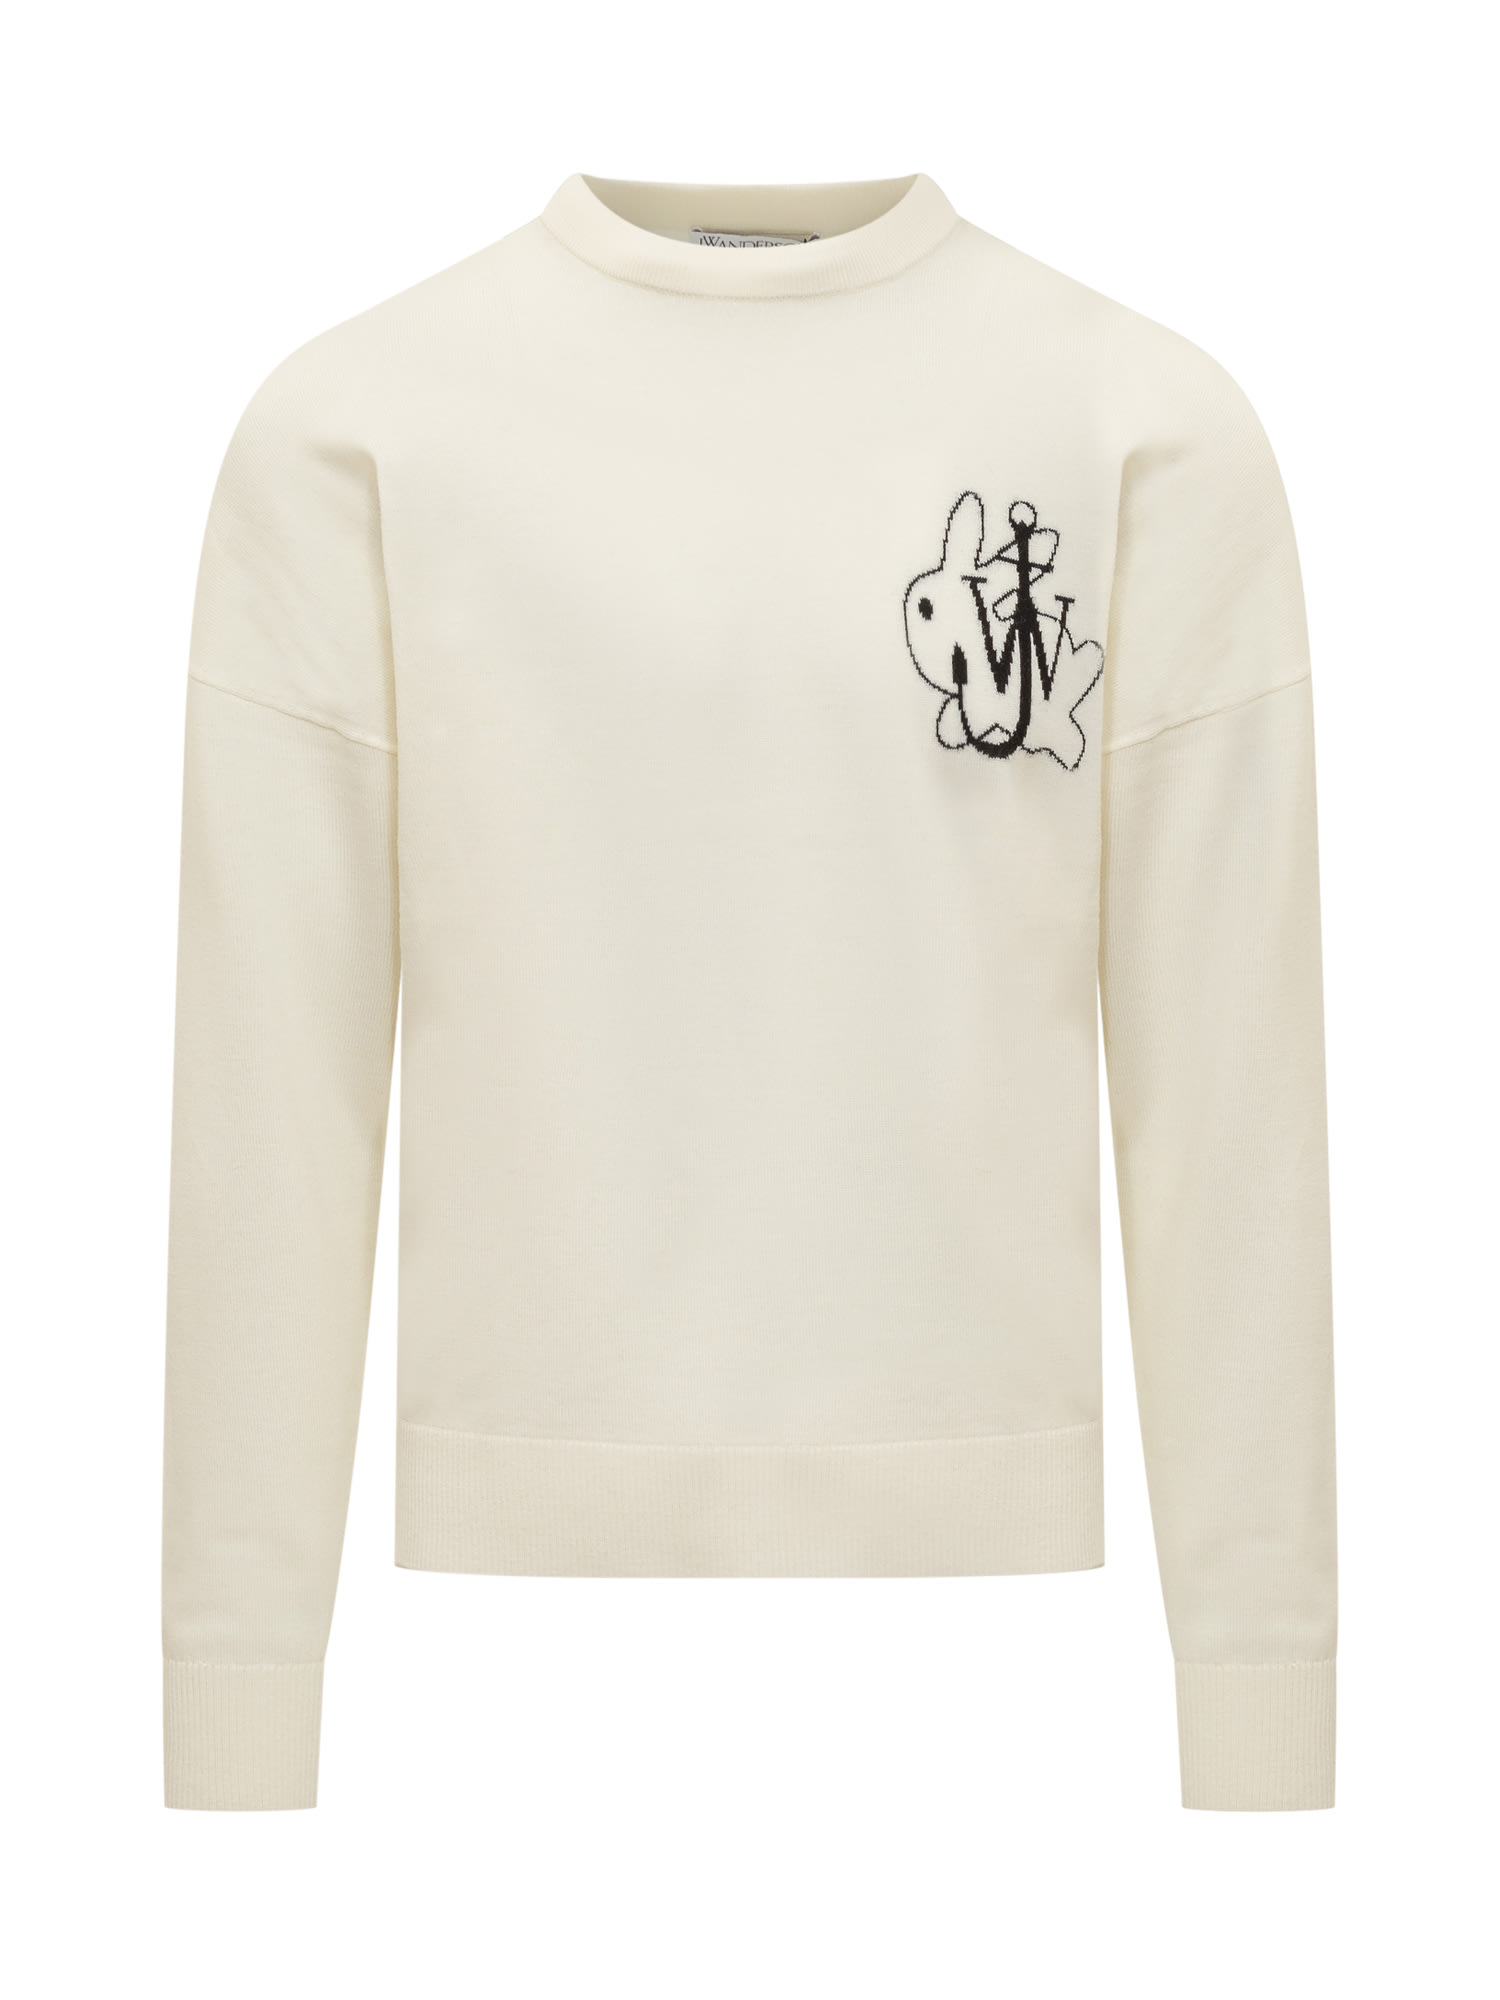 JW ANDERSON BUNNY SWEATER